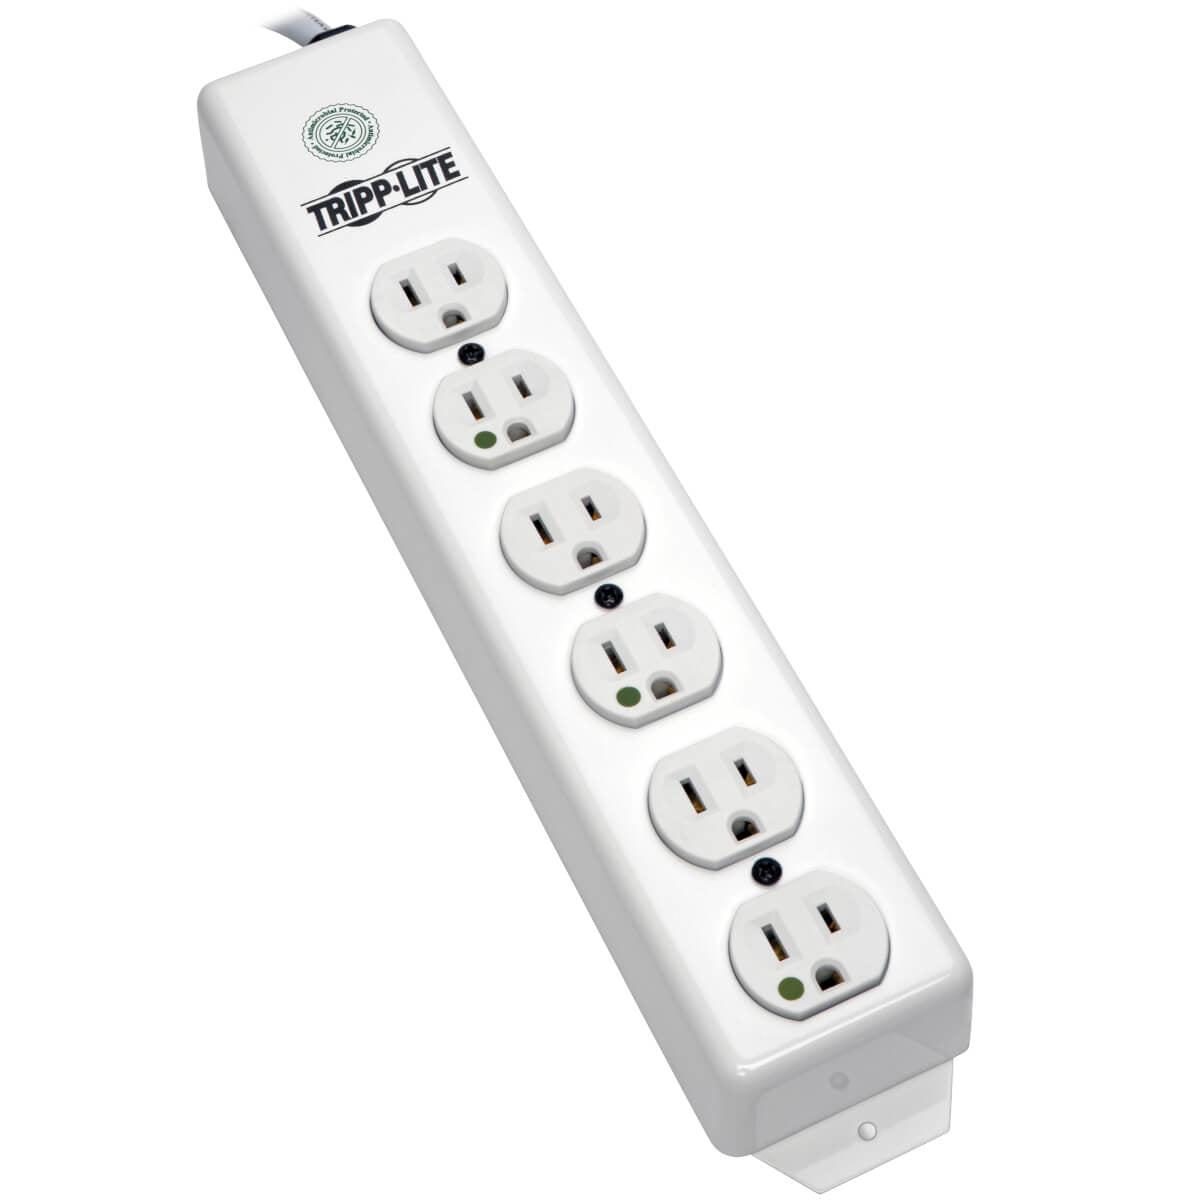 Tripp Lite Not For Patient-Care Vicinity  Ul 1363 Medical-Grade Power Strip With 6 Hospital-Grade Outlets, 6 Ft. Cord